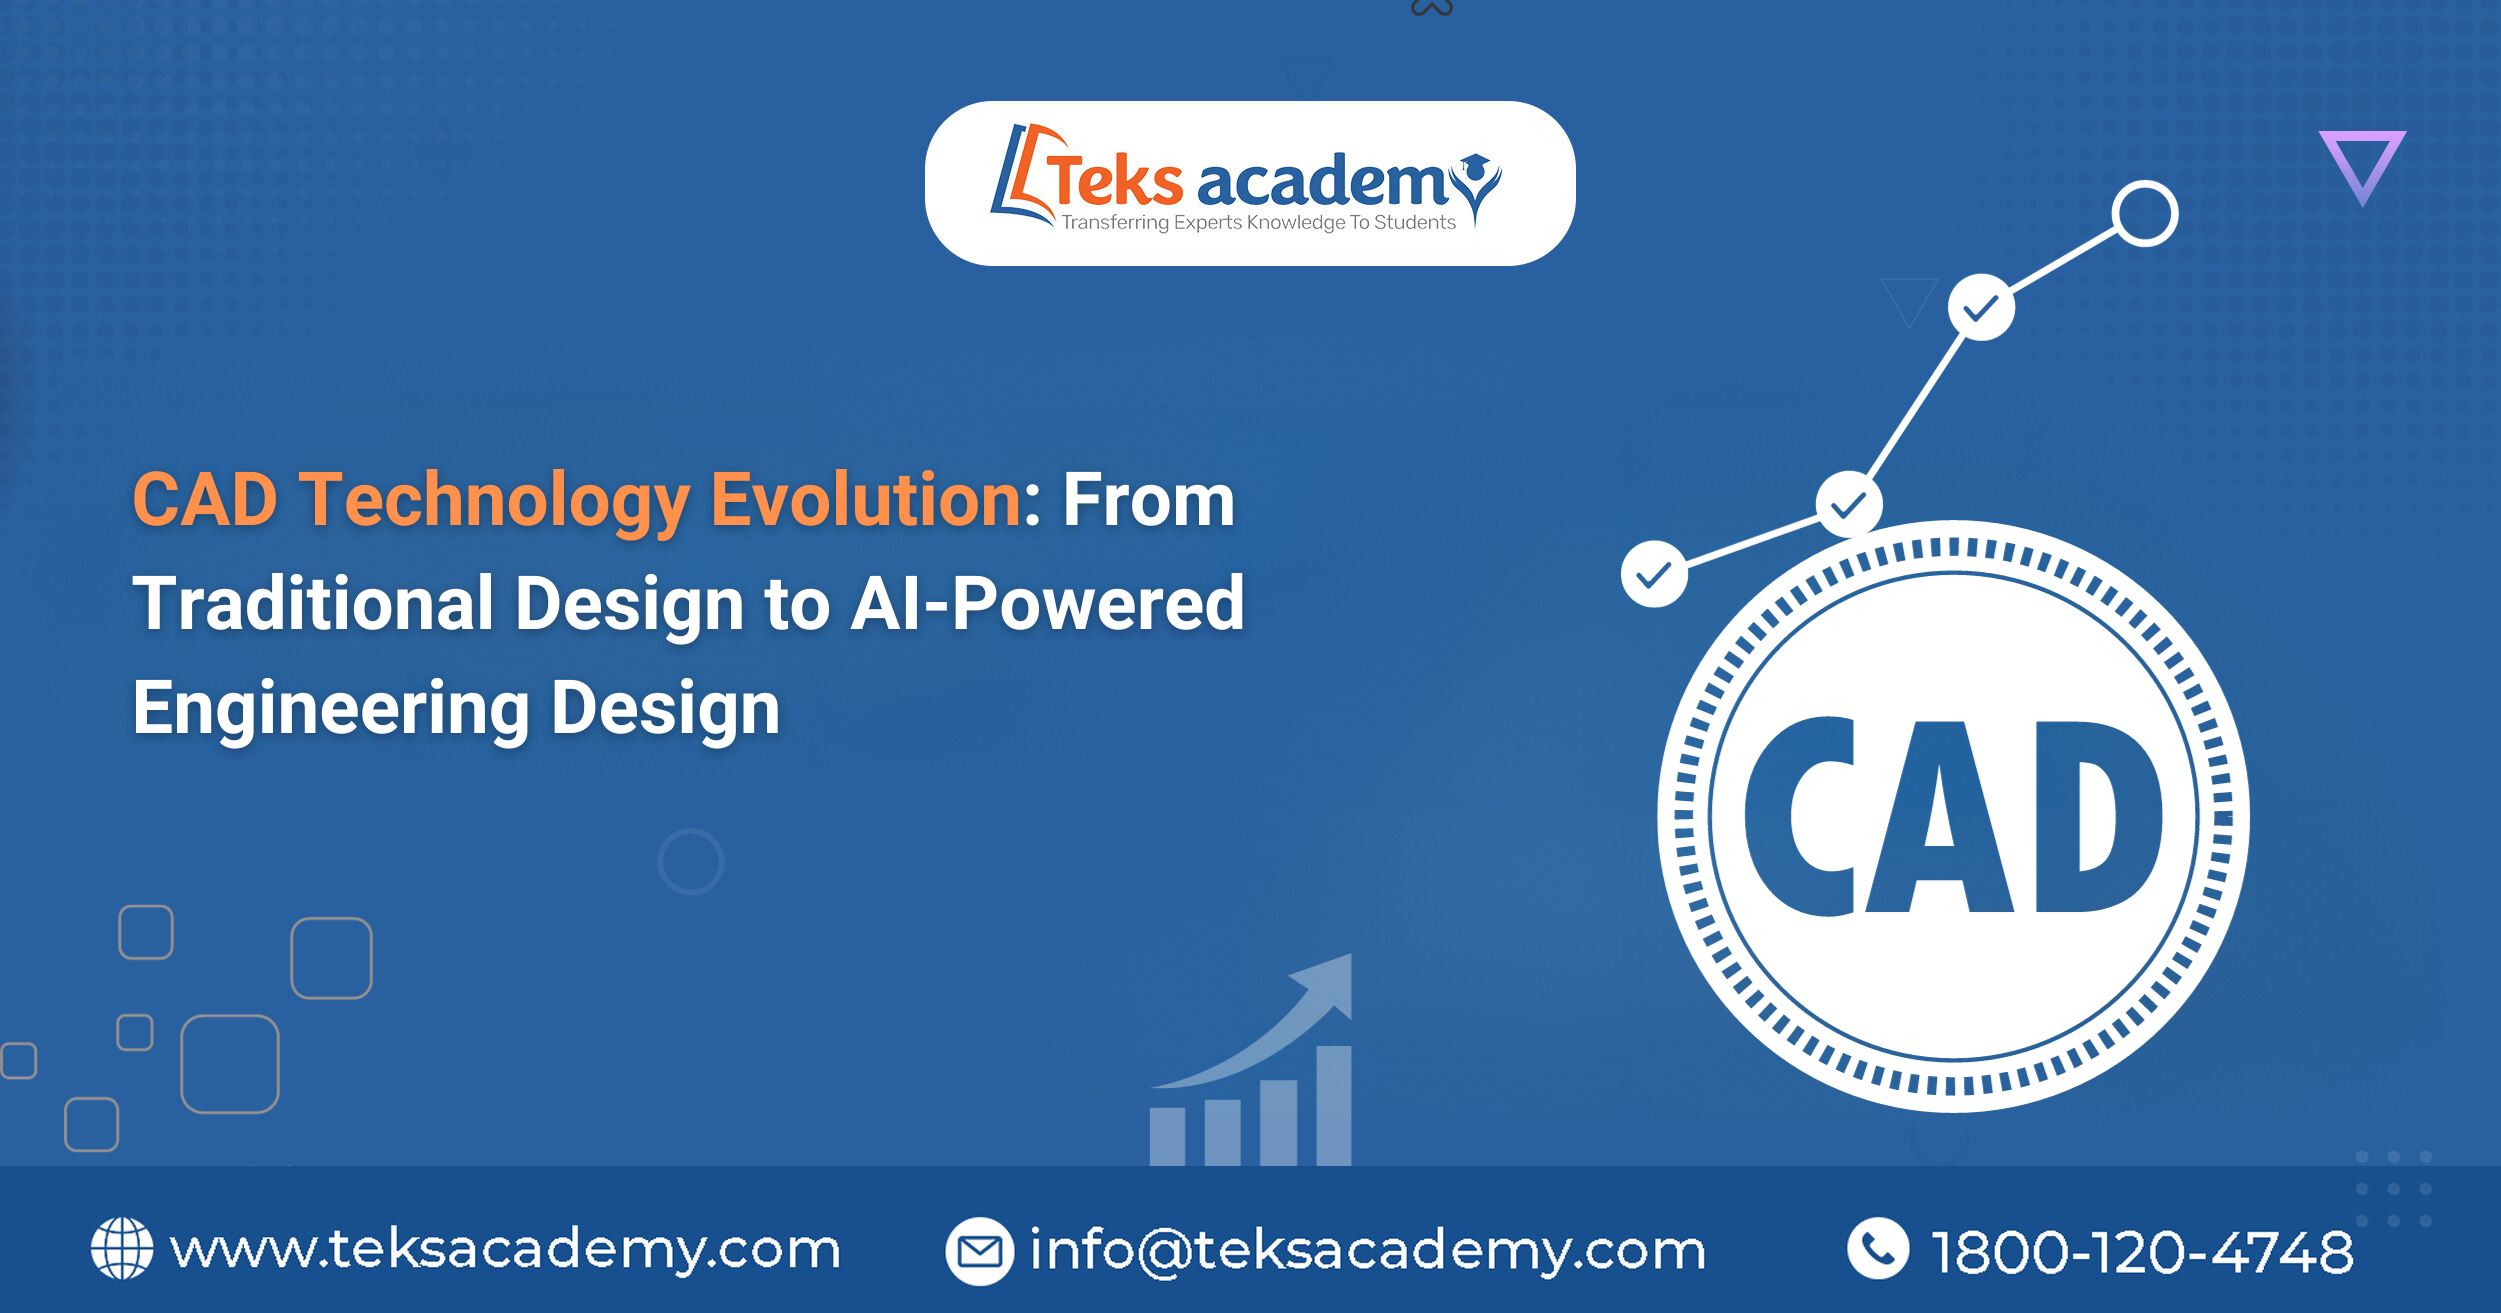 CAD Technology Evolution: From Traditional Design to AI-Powered Engineering Design